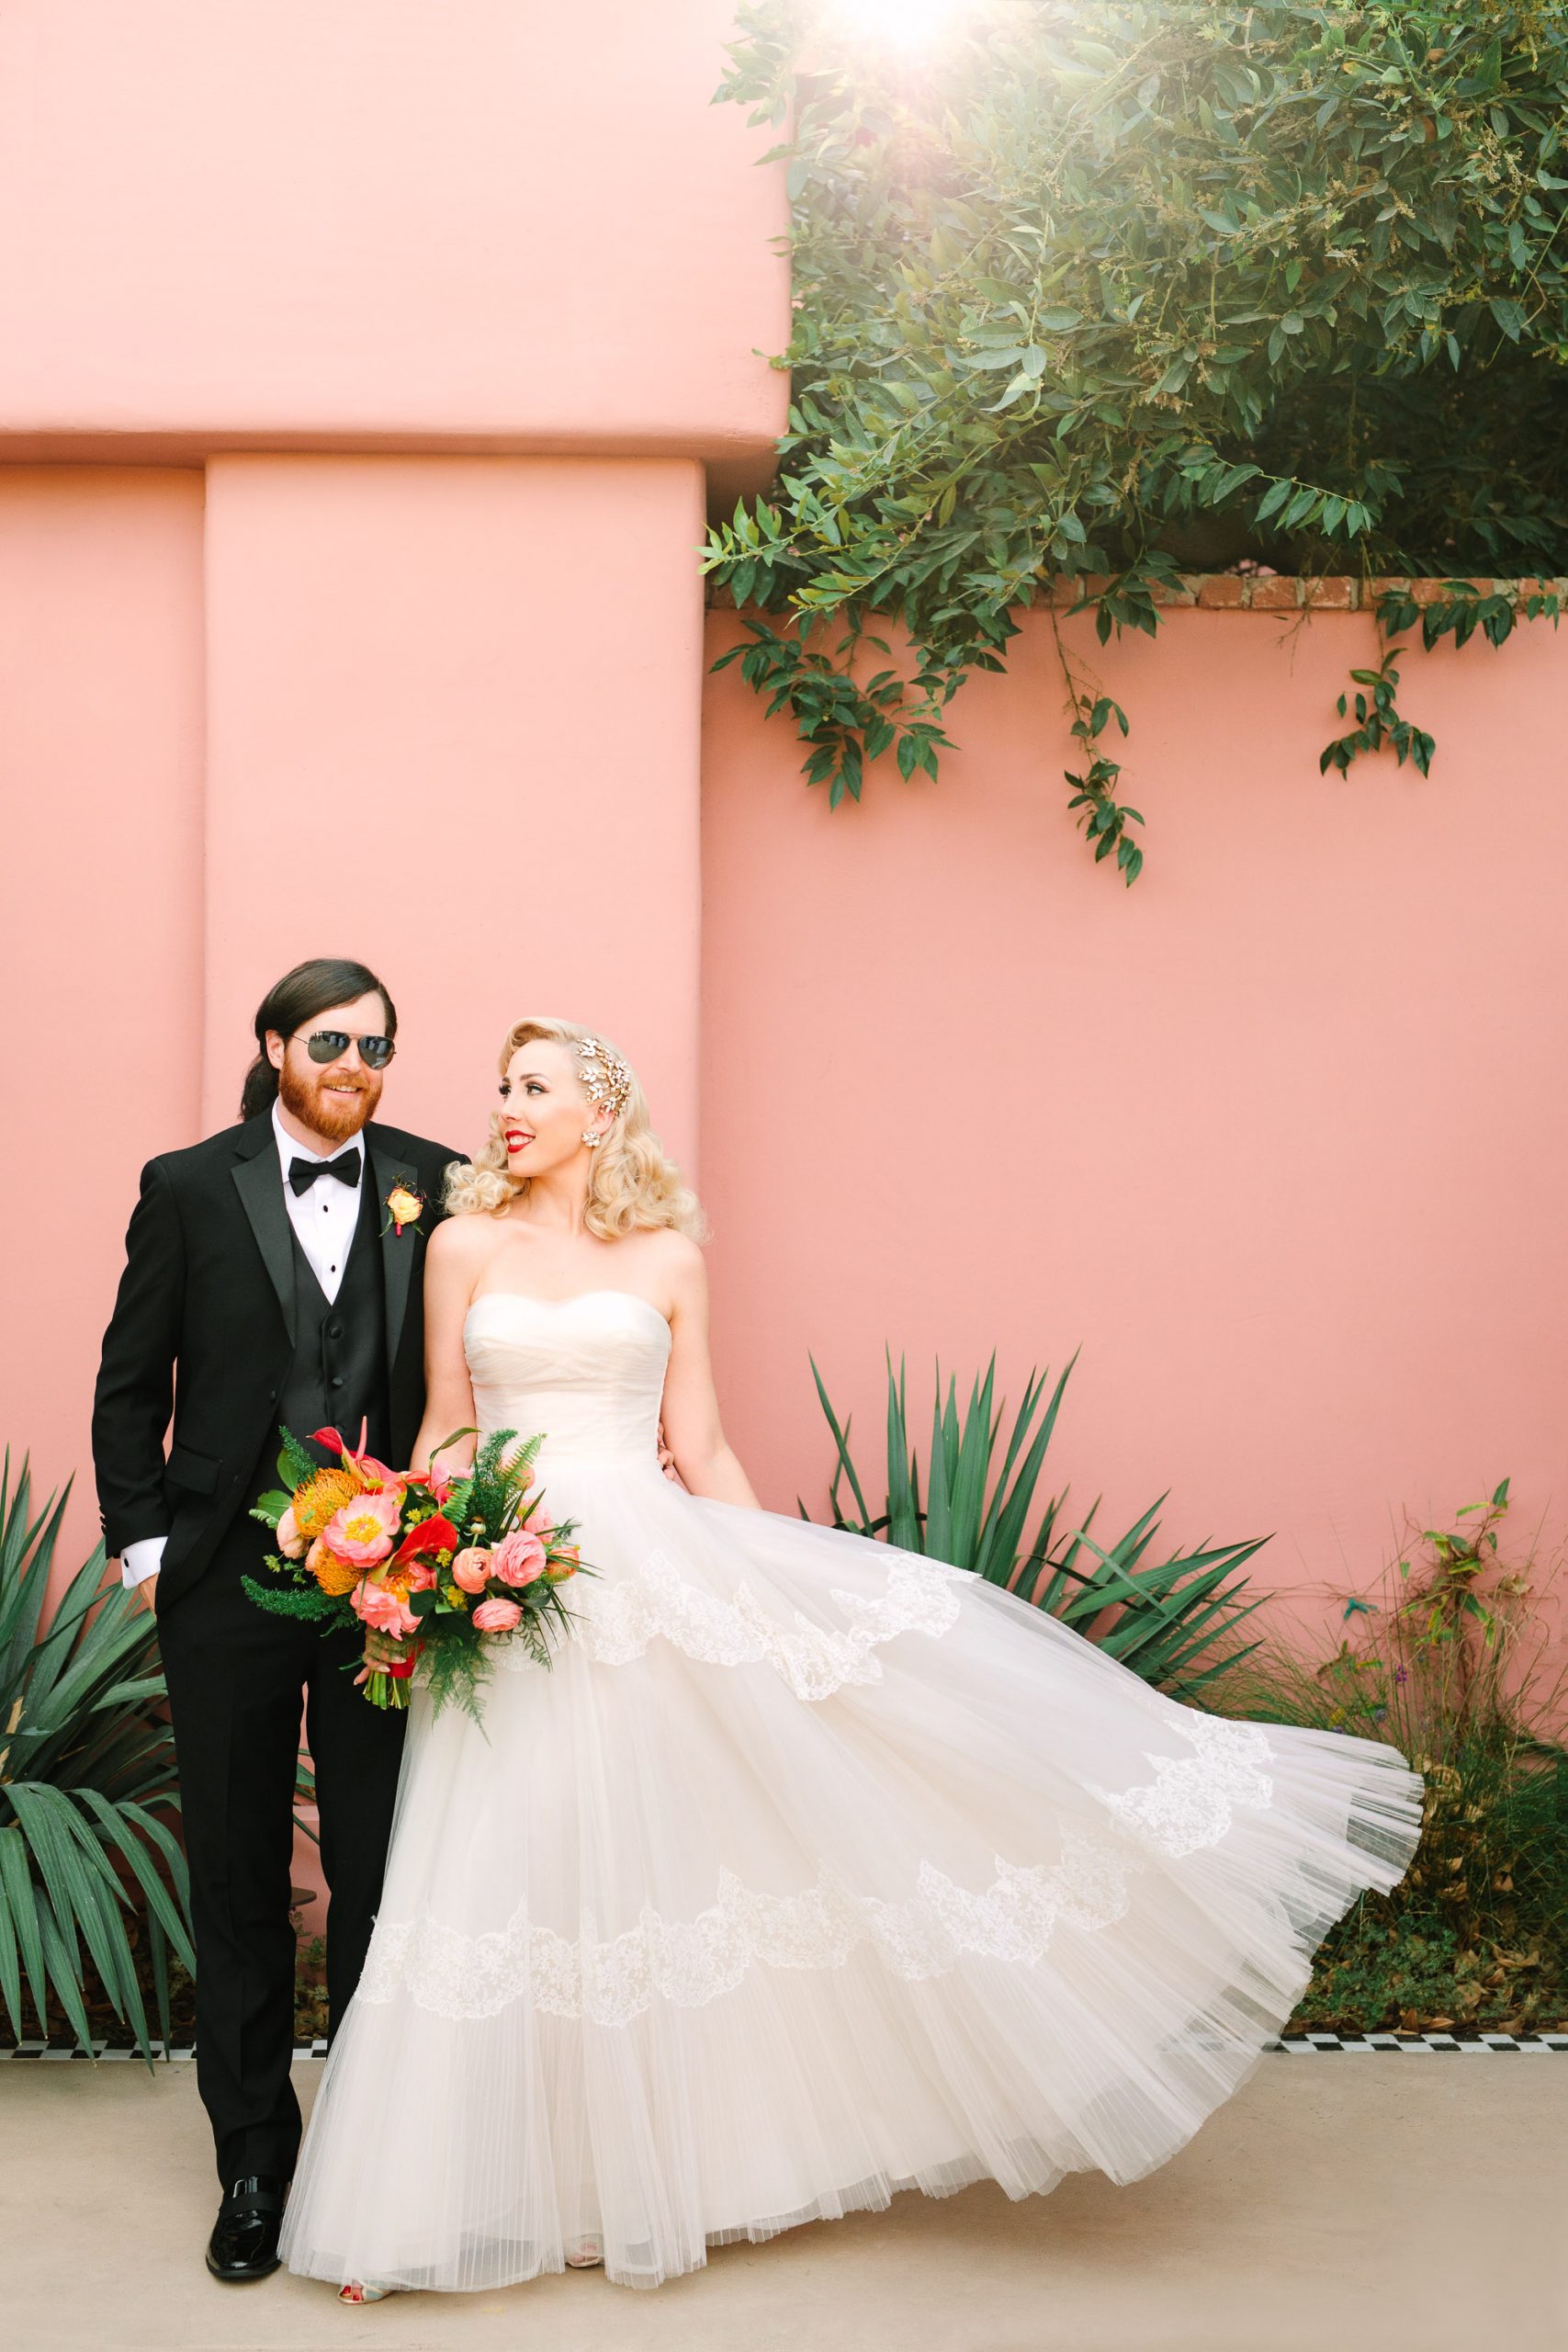 Wedding couple at pink Sands Hotel by Mary Costa Photography